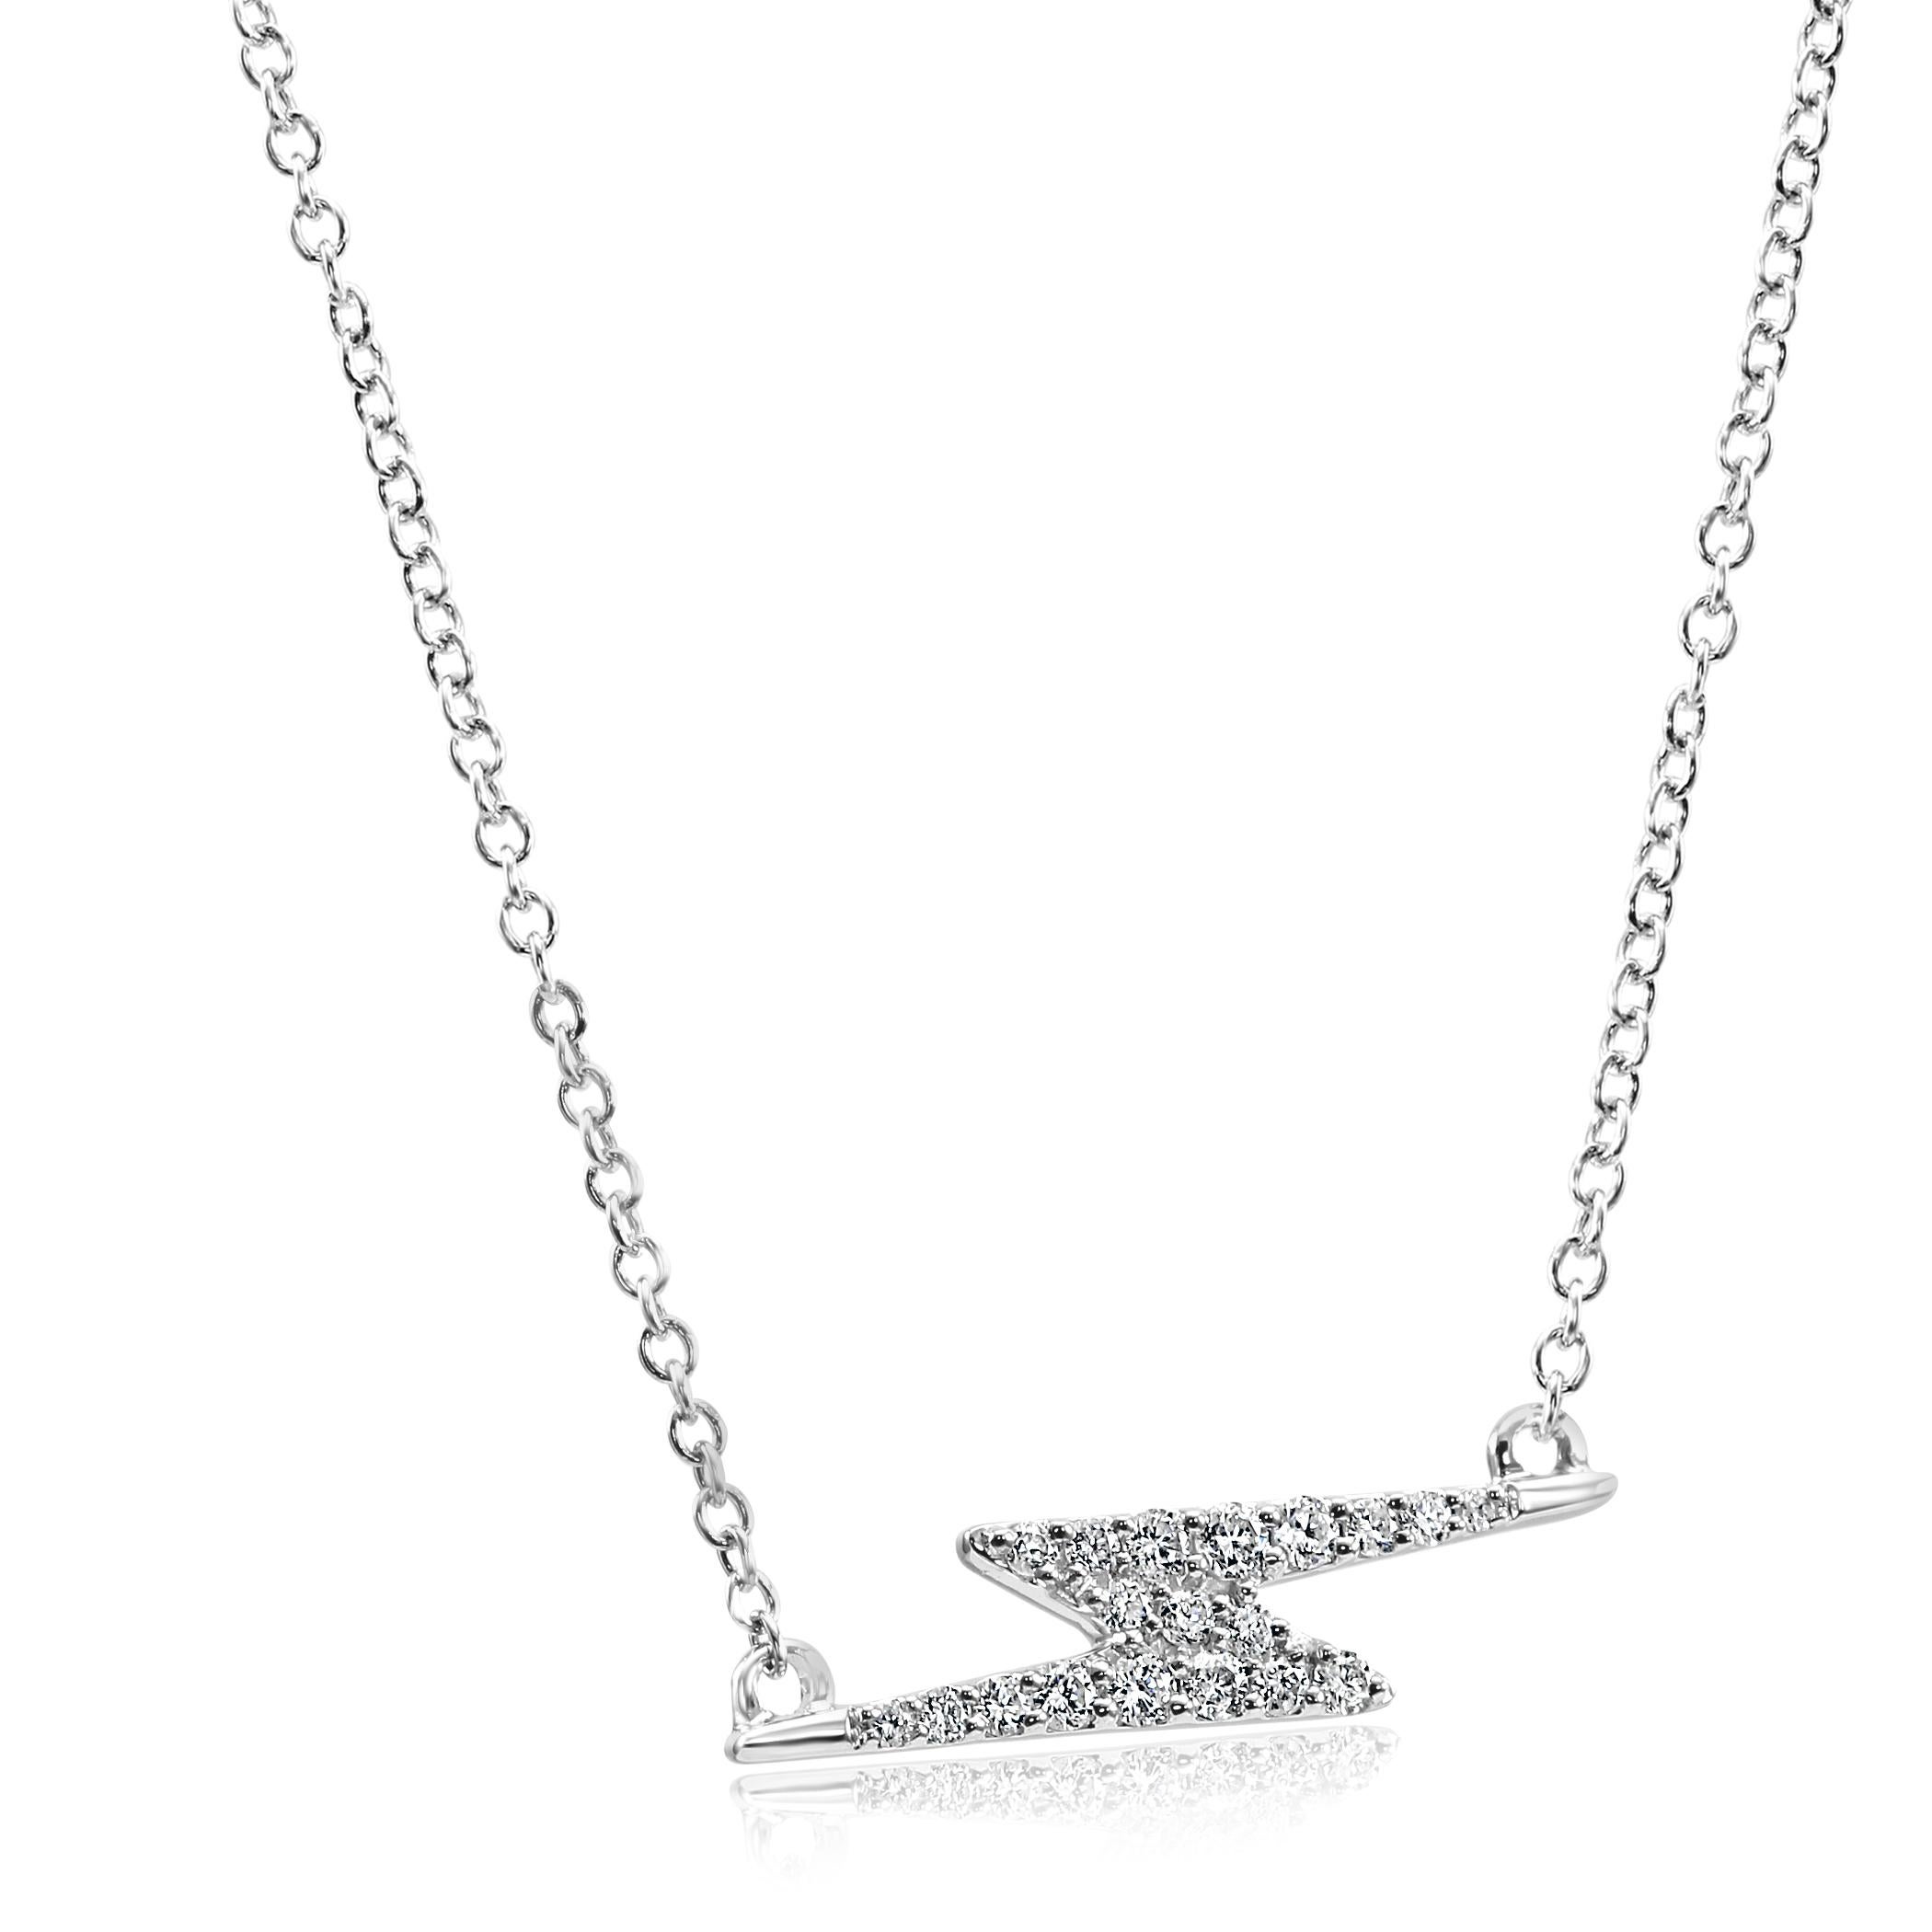 19 White Colorless SI Clarity Diamond Rounds 0.18 Carat Set in Stylish everyday wear 14K White Gold Dangle Drop Pendant Chain Necklace. Can be worn as 18 inches or 16 inches. 

Total Diamond Weight 0.18 Carat

Style available in all gold colors and